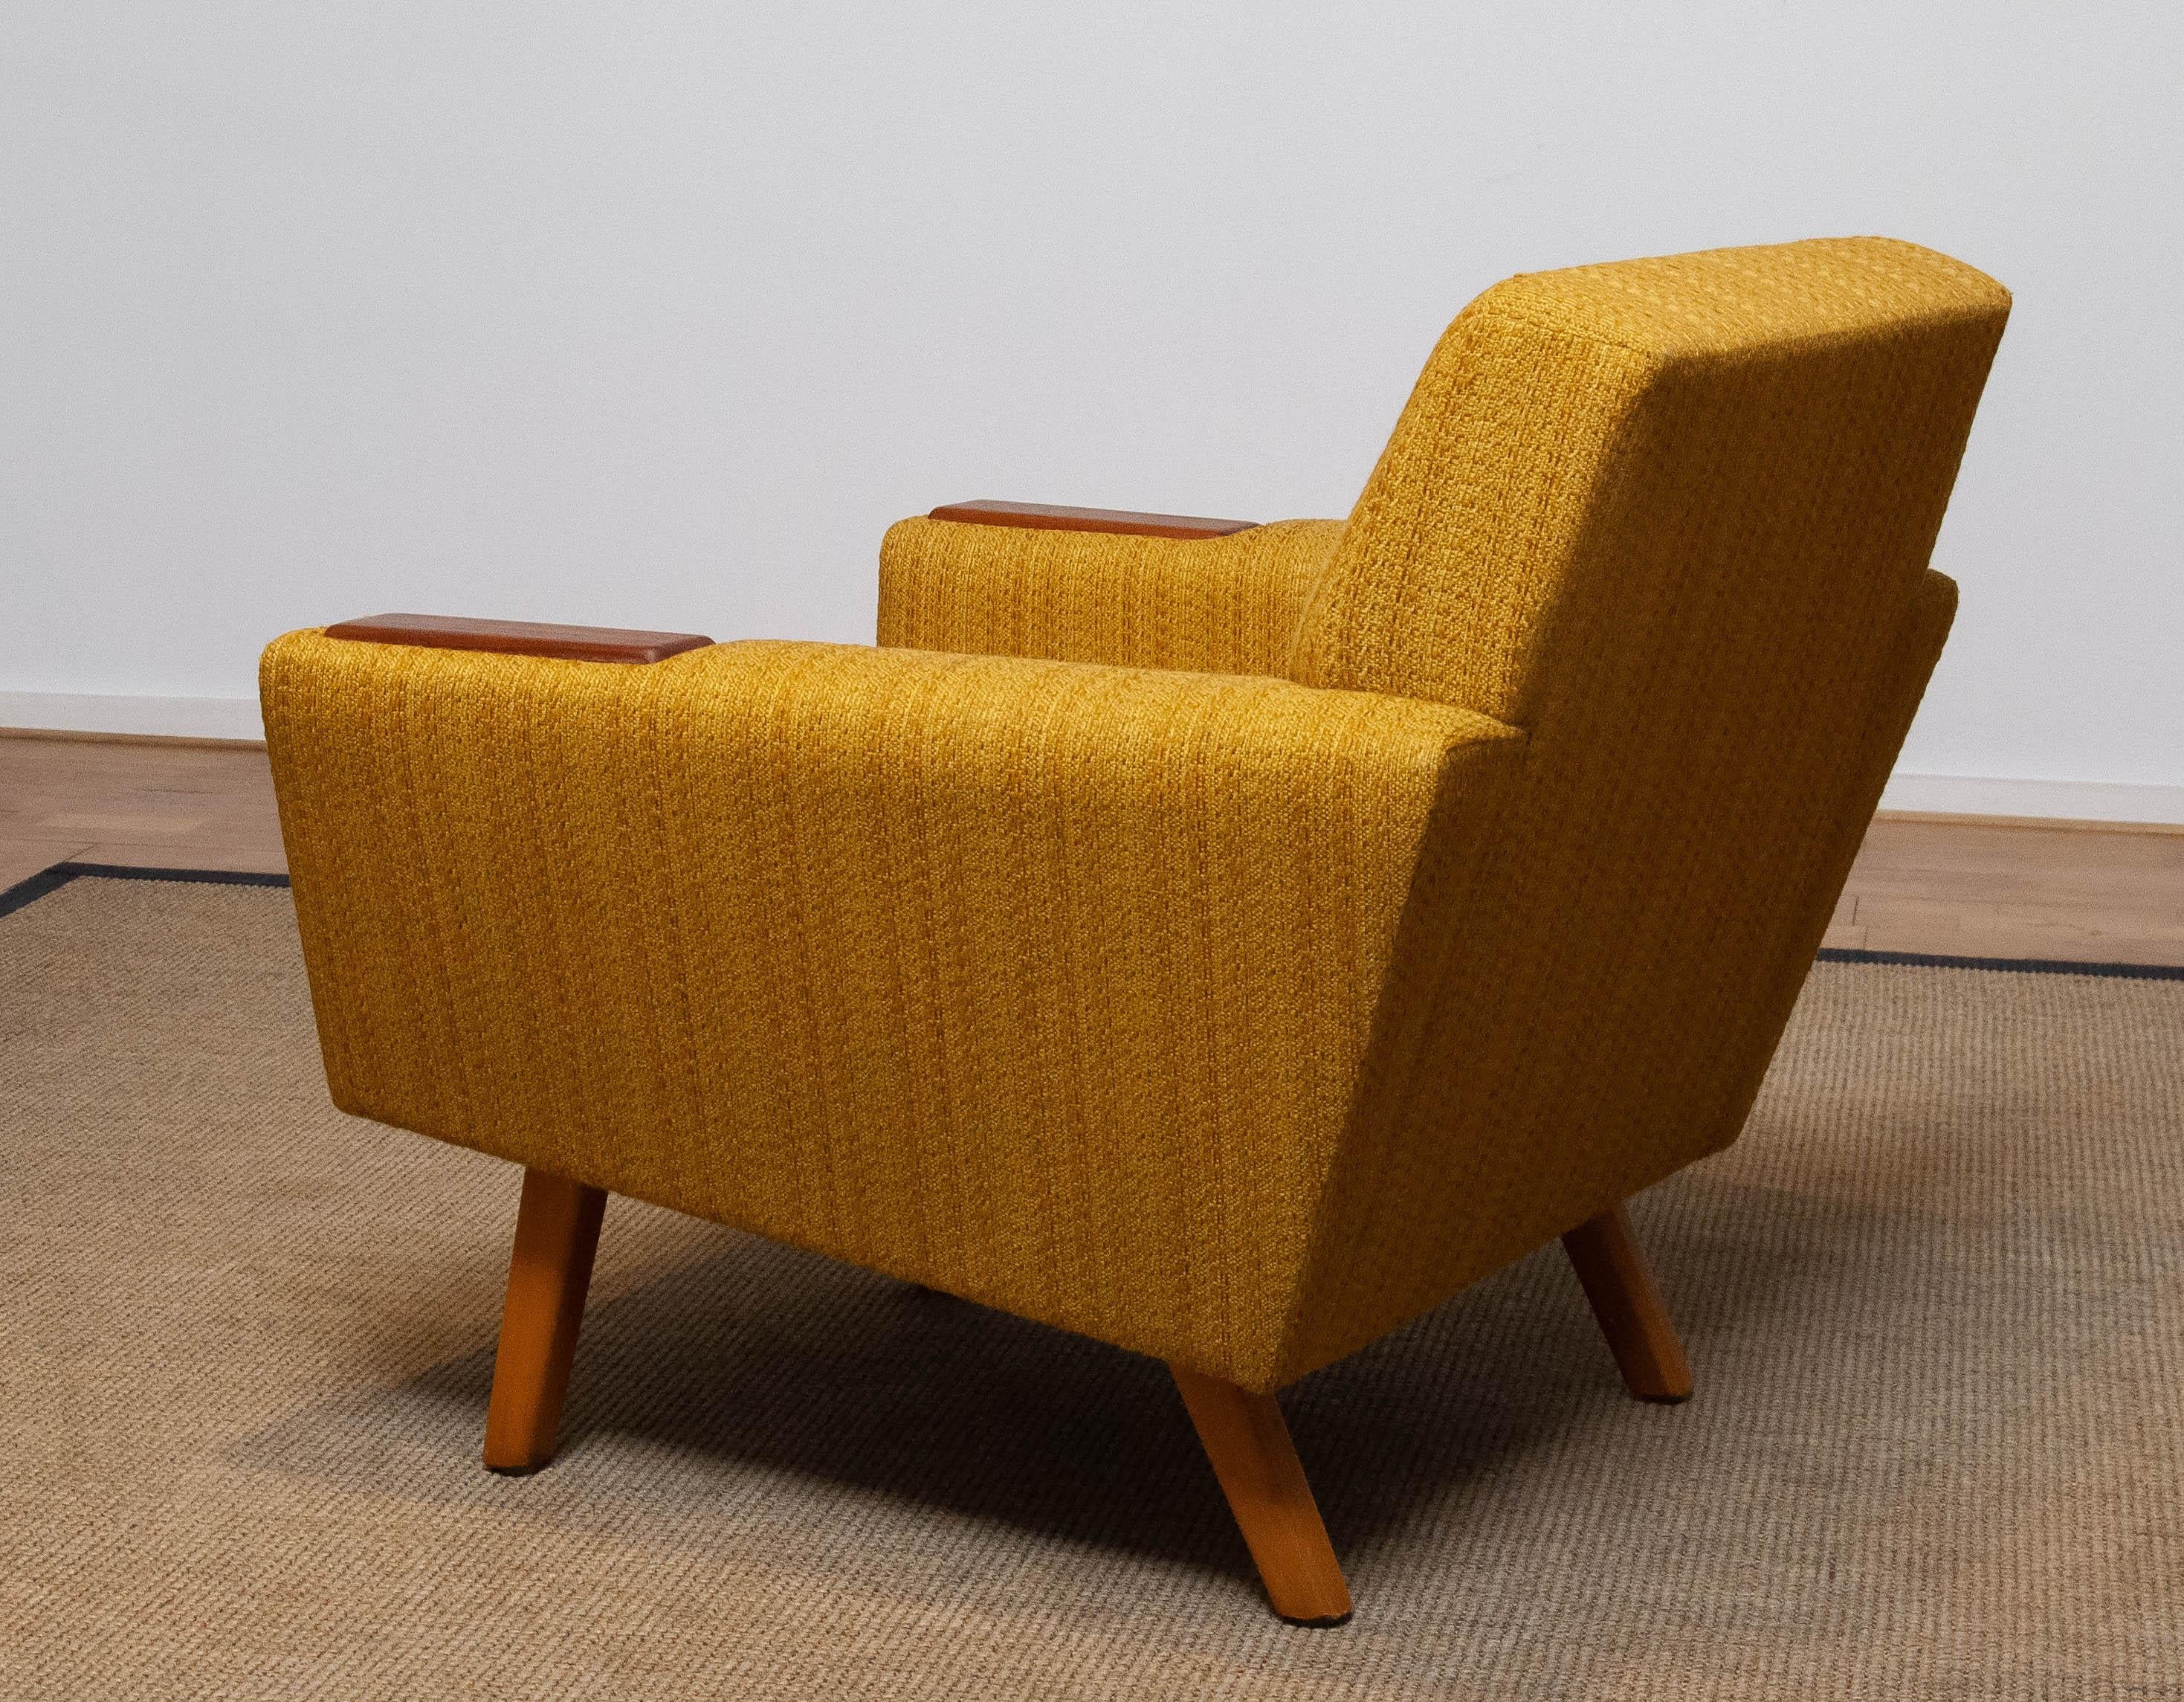 Mid-20th Century Mid Century Scandinavian Lounge / Club Chair with Teak Paws in Fabric, Denmark For Sale